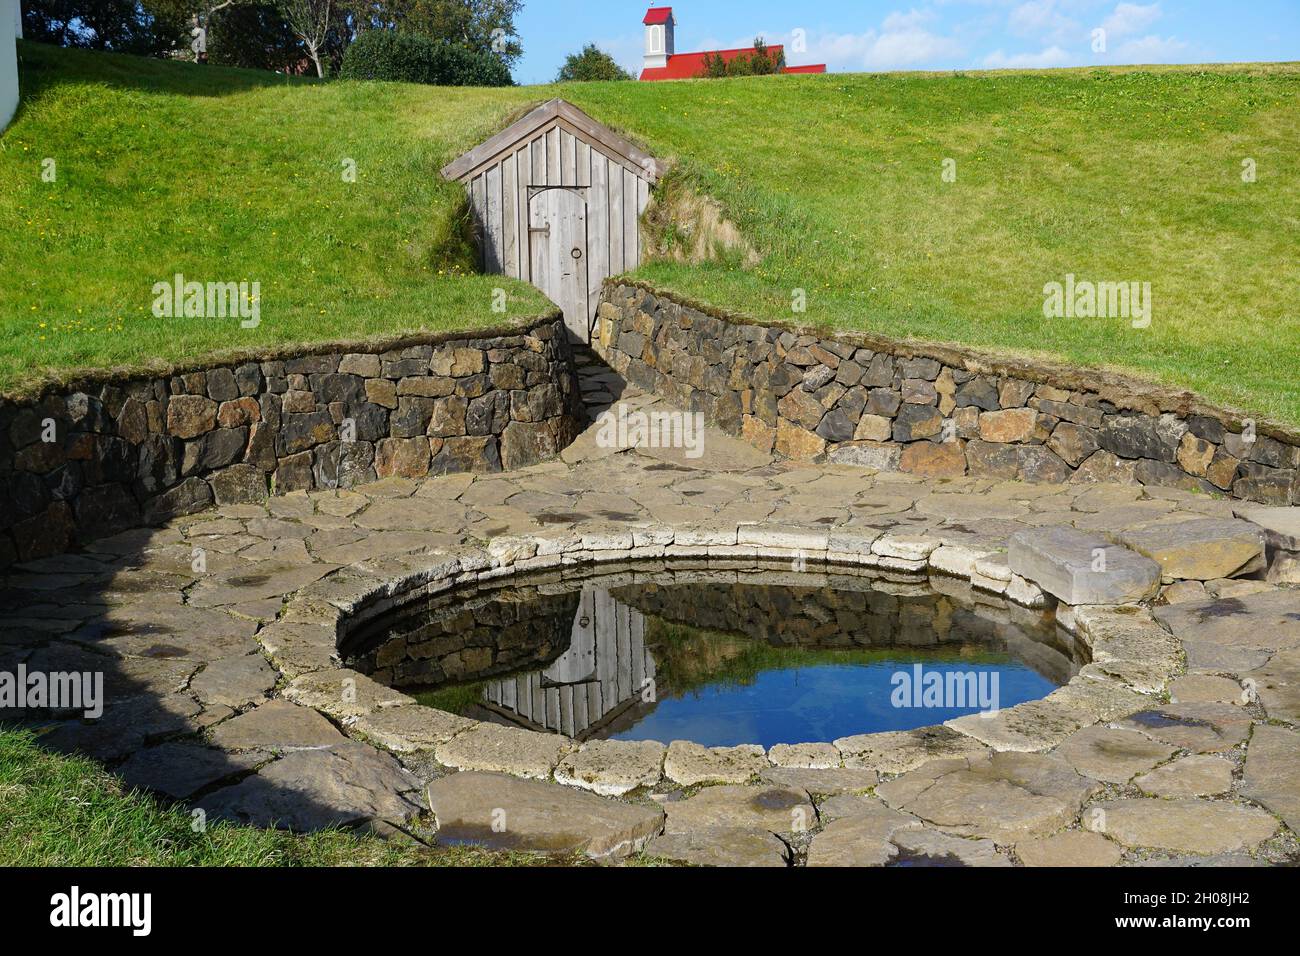 Reykholt, Iceland: Snorralaug, the warm outdoor bathing pool of Snorri Sturluson and one of the first archaeological remains to be listed in Iceland. Stock Photo